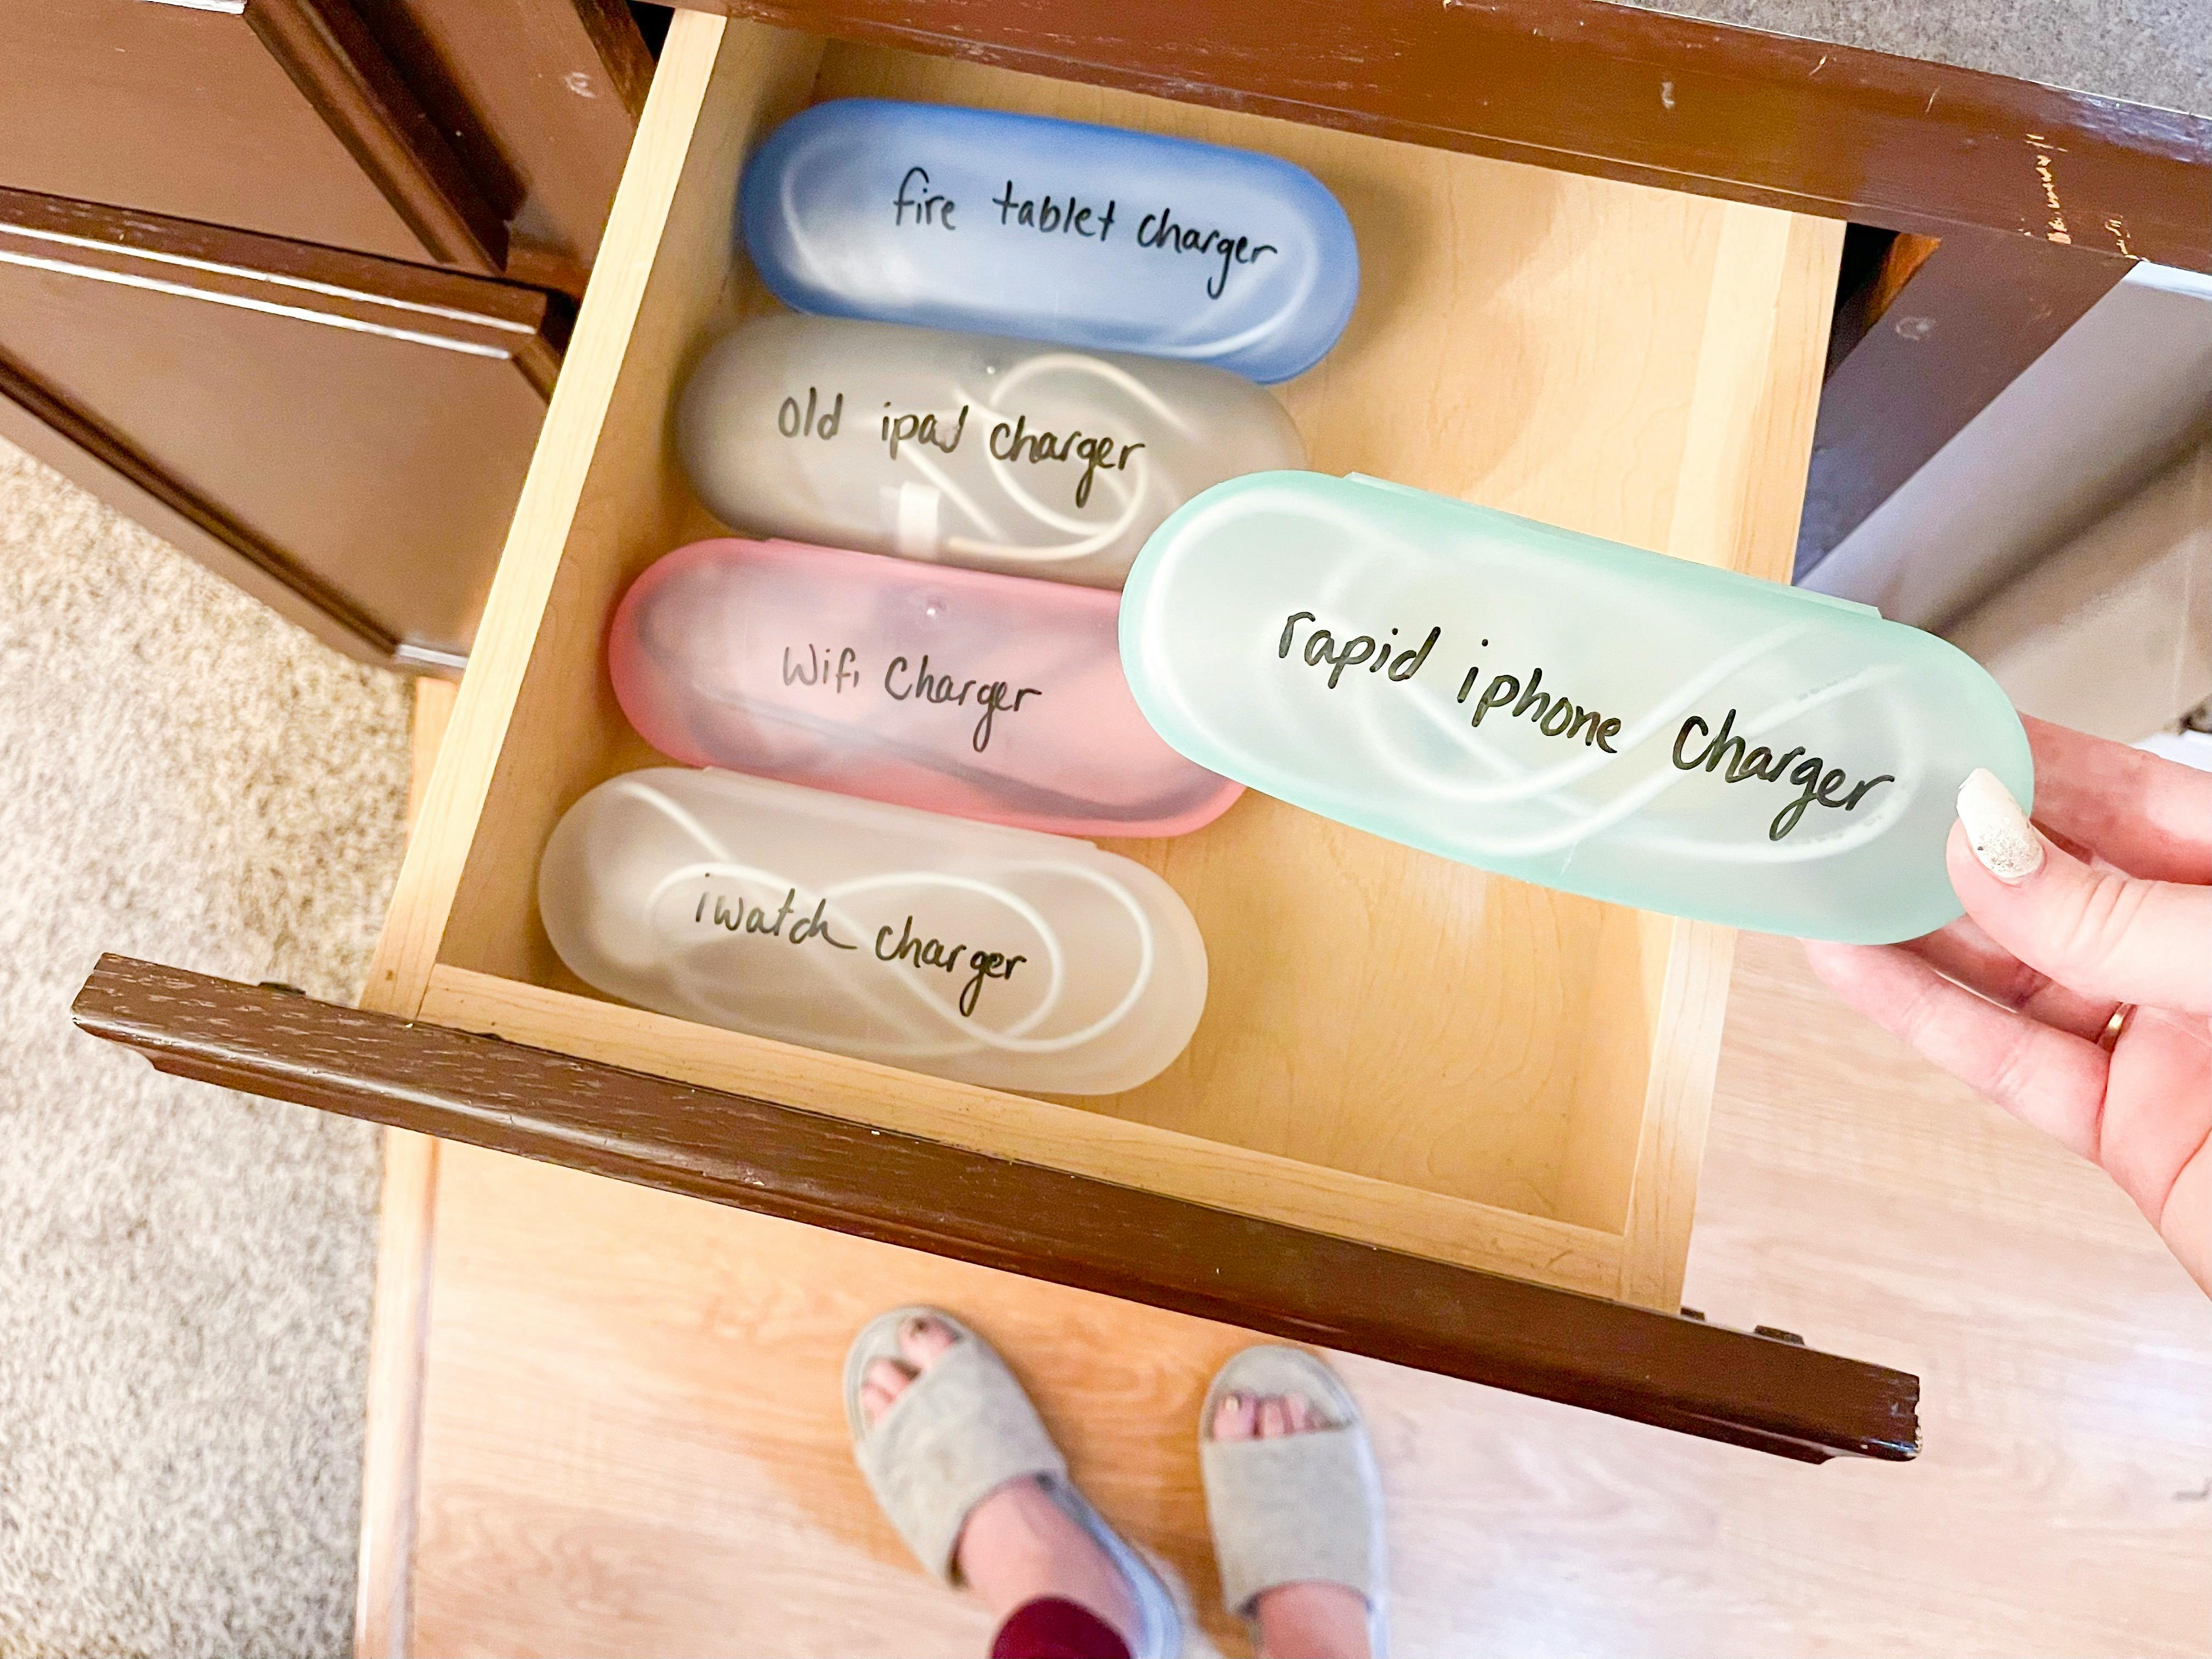 Bathroom Drawer Organize on a Budget: Dollar Store Products for the Win!